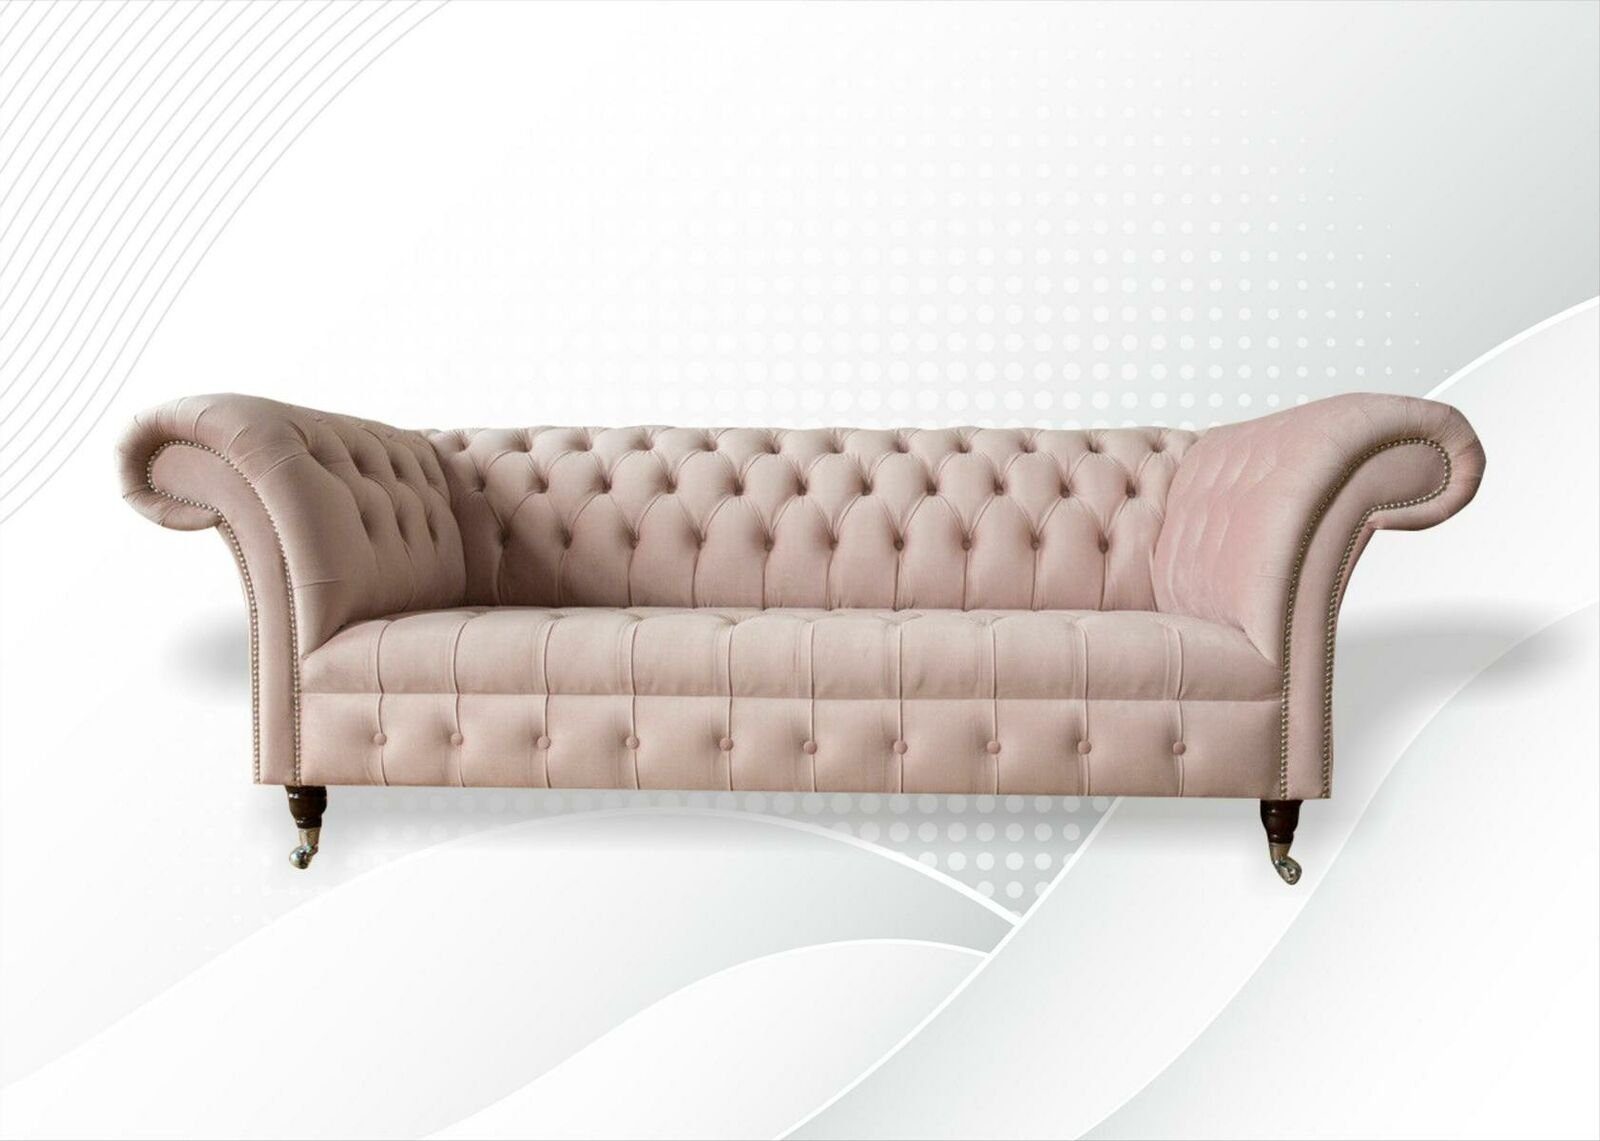 JVmoebel Chesterfield-Sofa Luxus Moderne Chesterfield Couch modernes Design Neu, Made in Europe